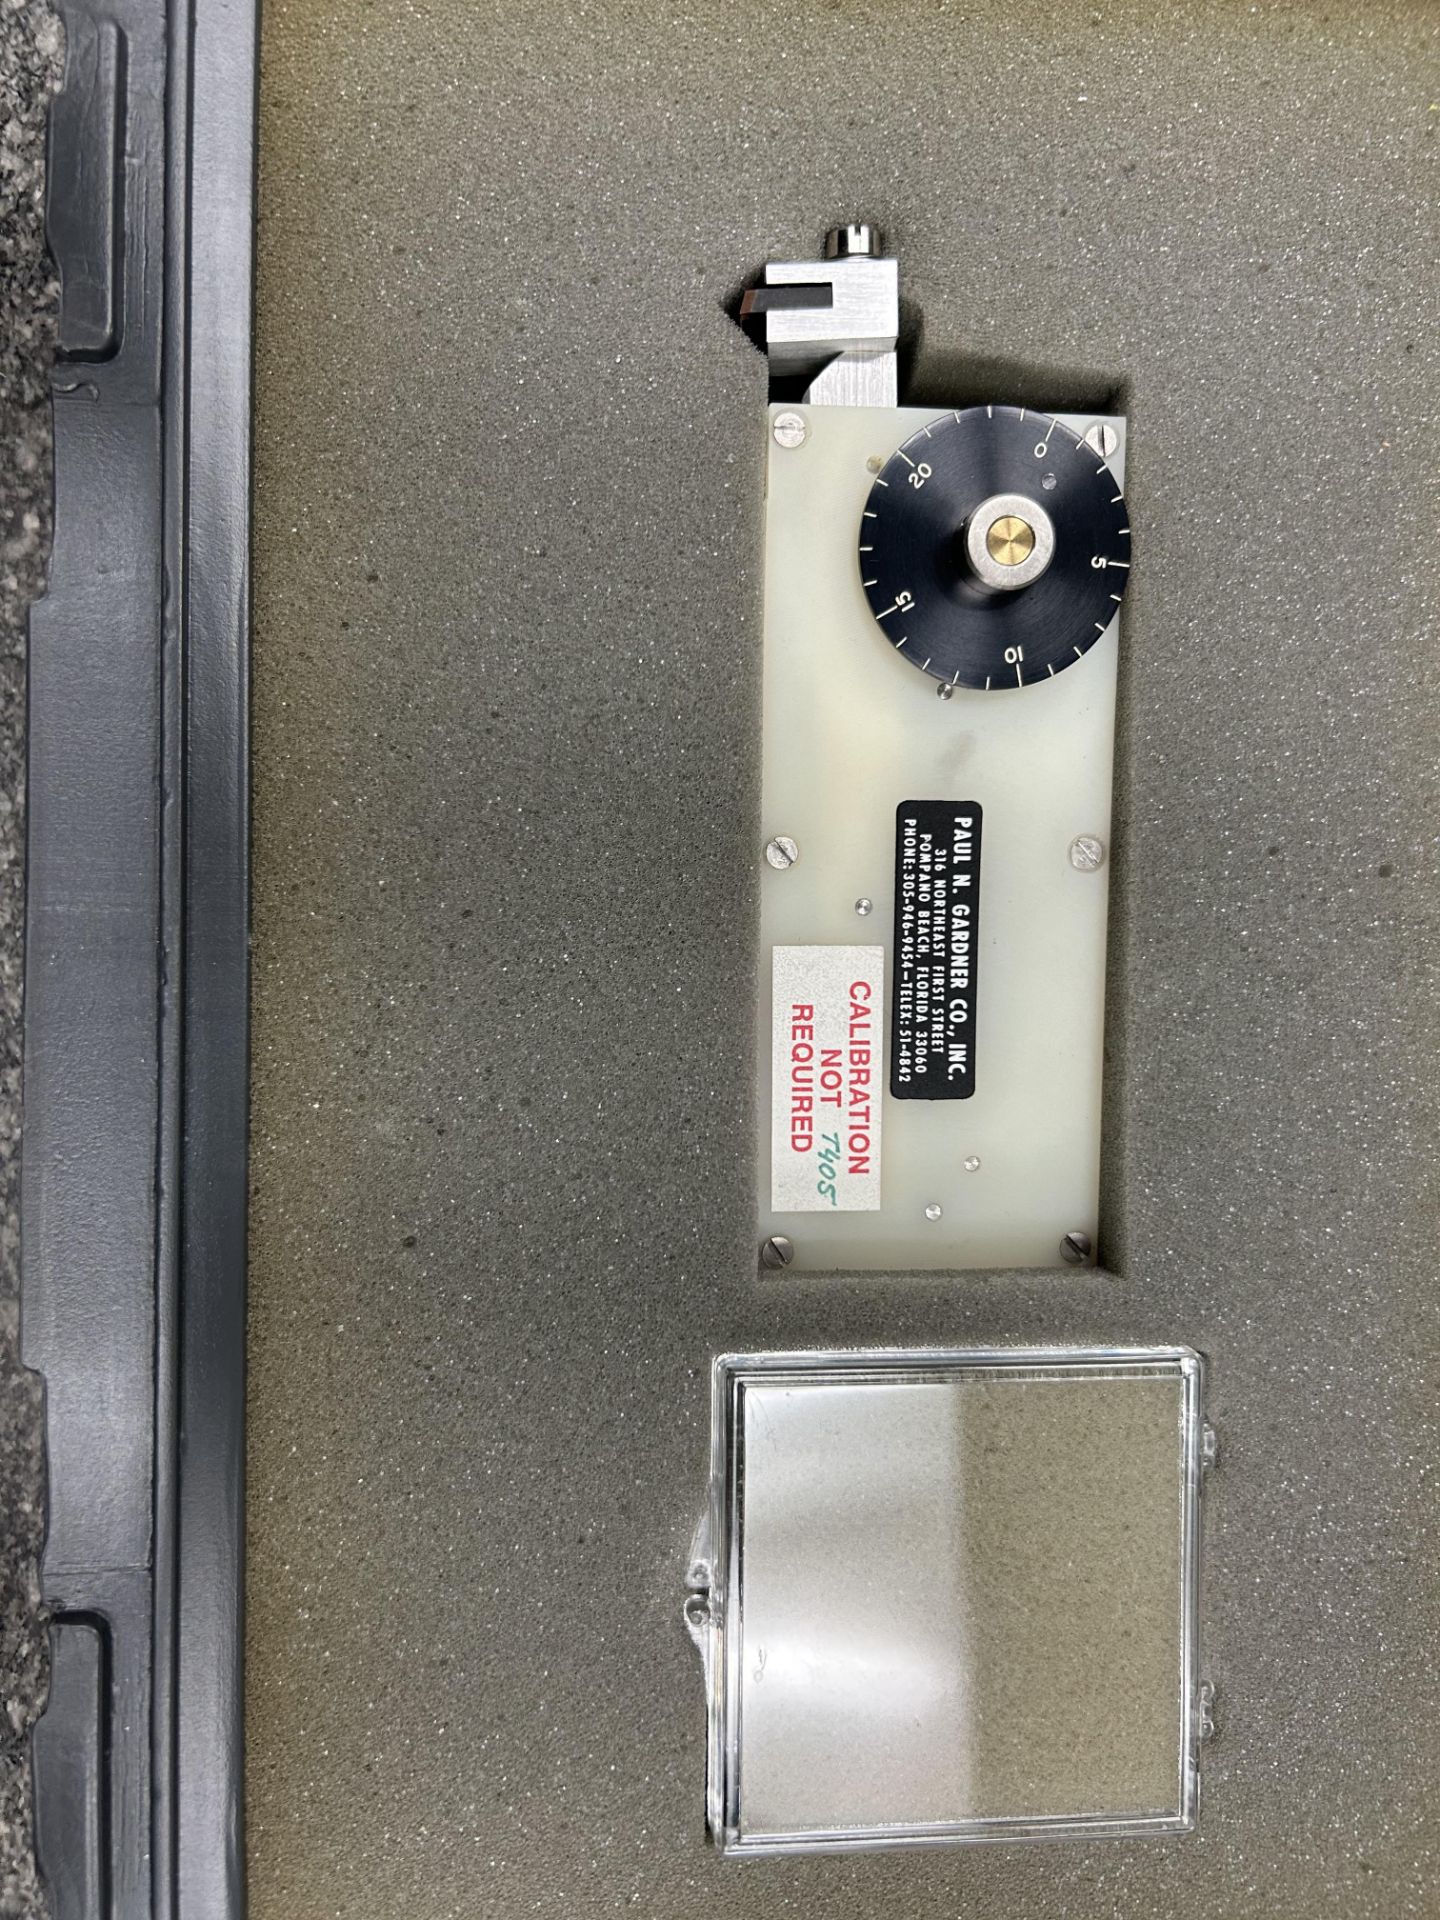 GARDCO mod. PA-5050 Scratch Adhesion Mar Tester (S.A.M Tester) w/case - Image 2 of 4